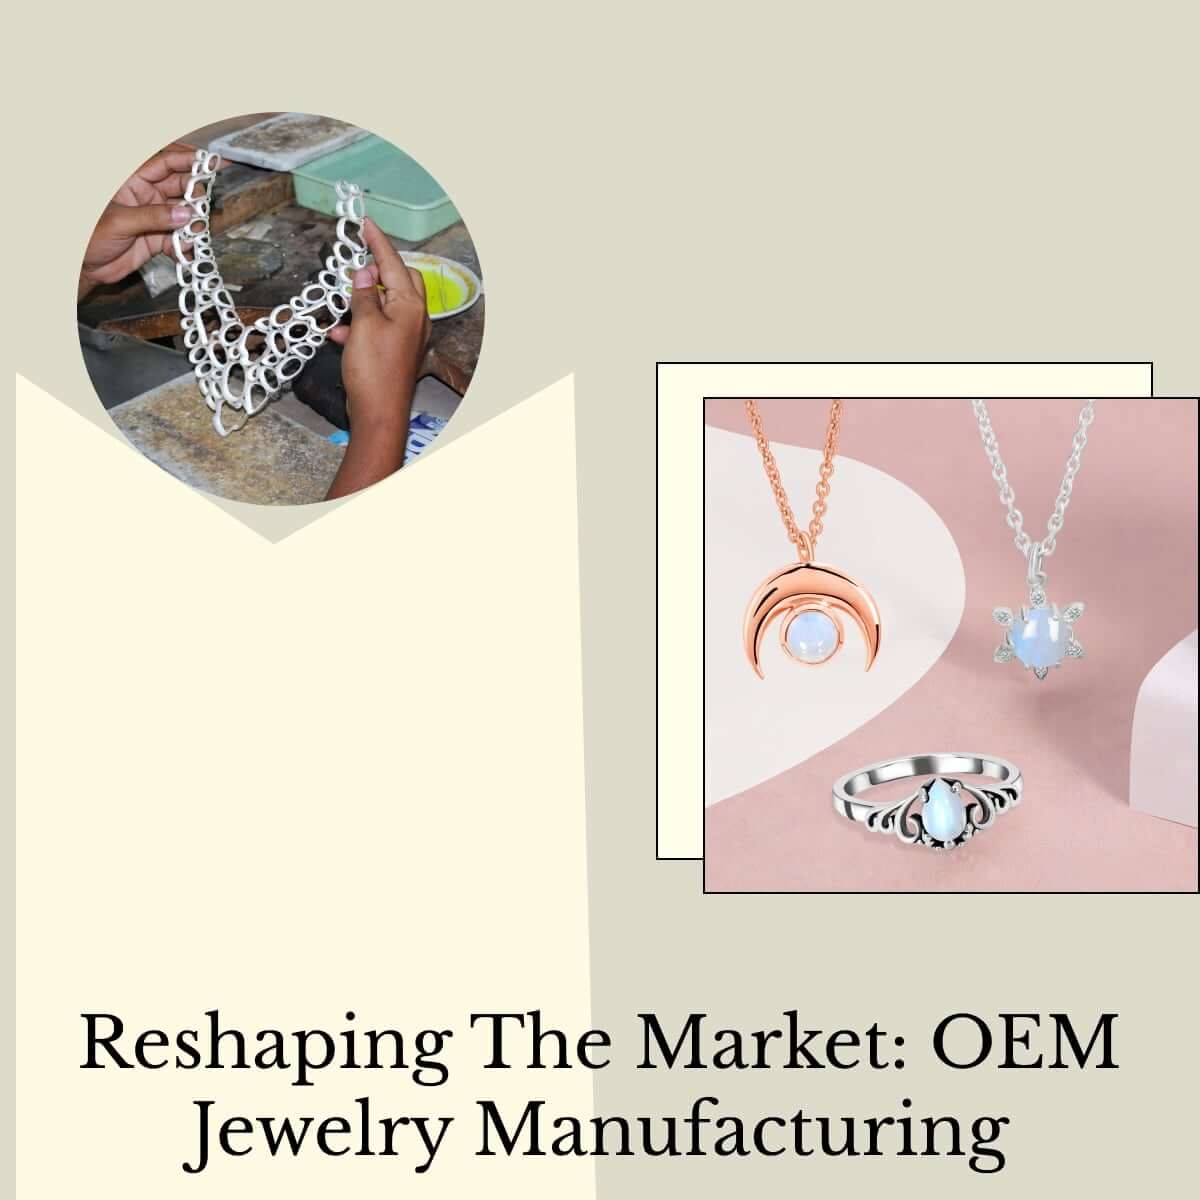 OEM Jewelry Manufacturing's Impact on the Market